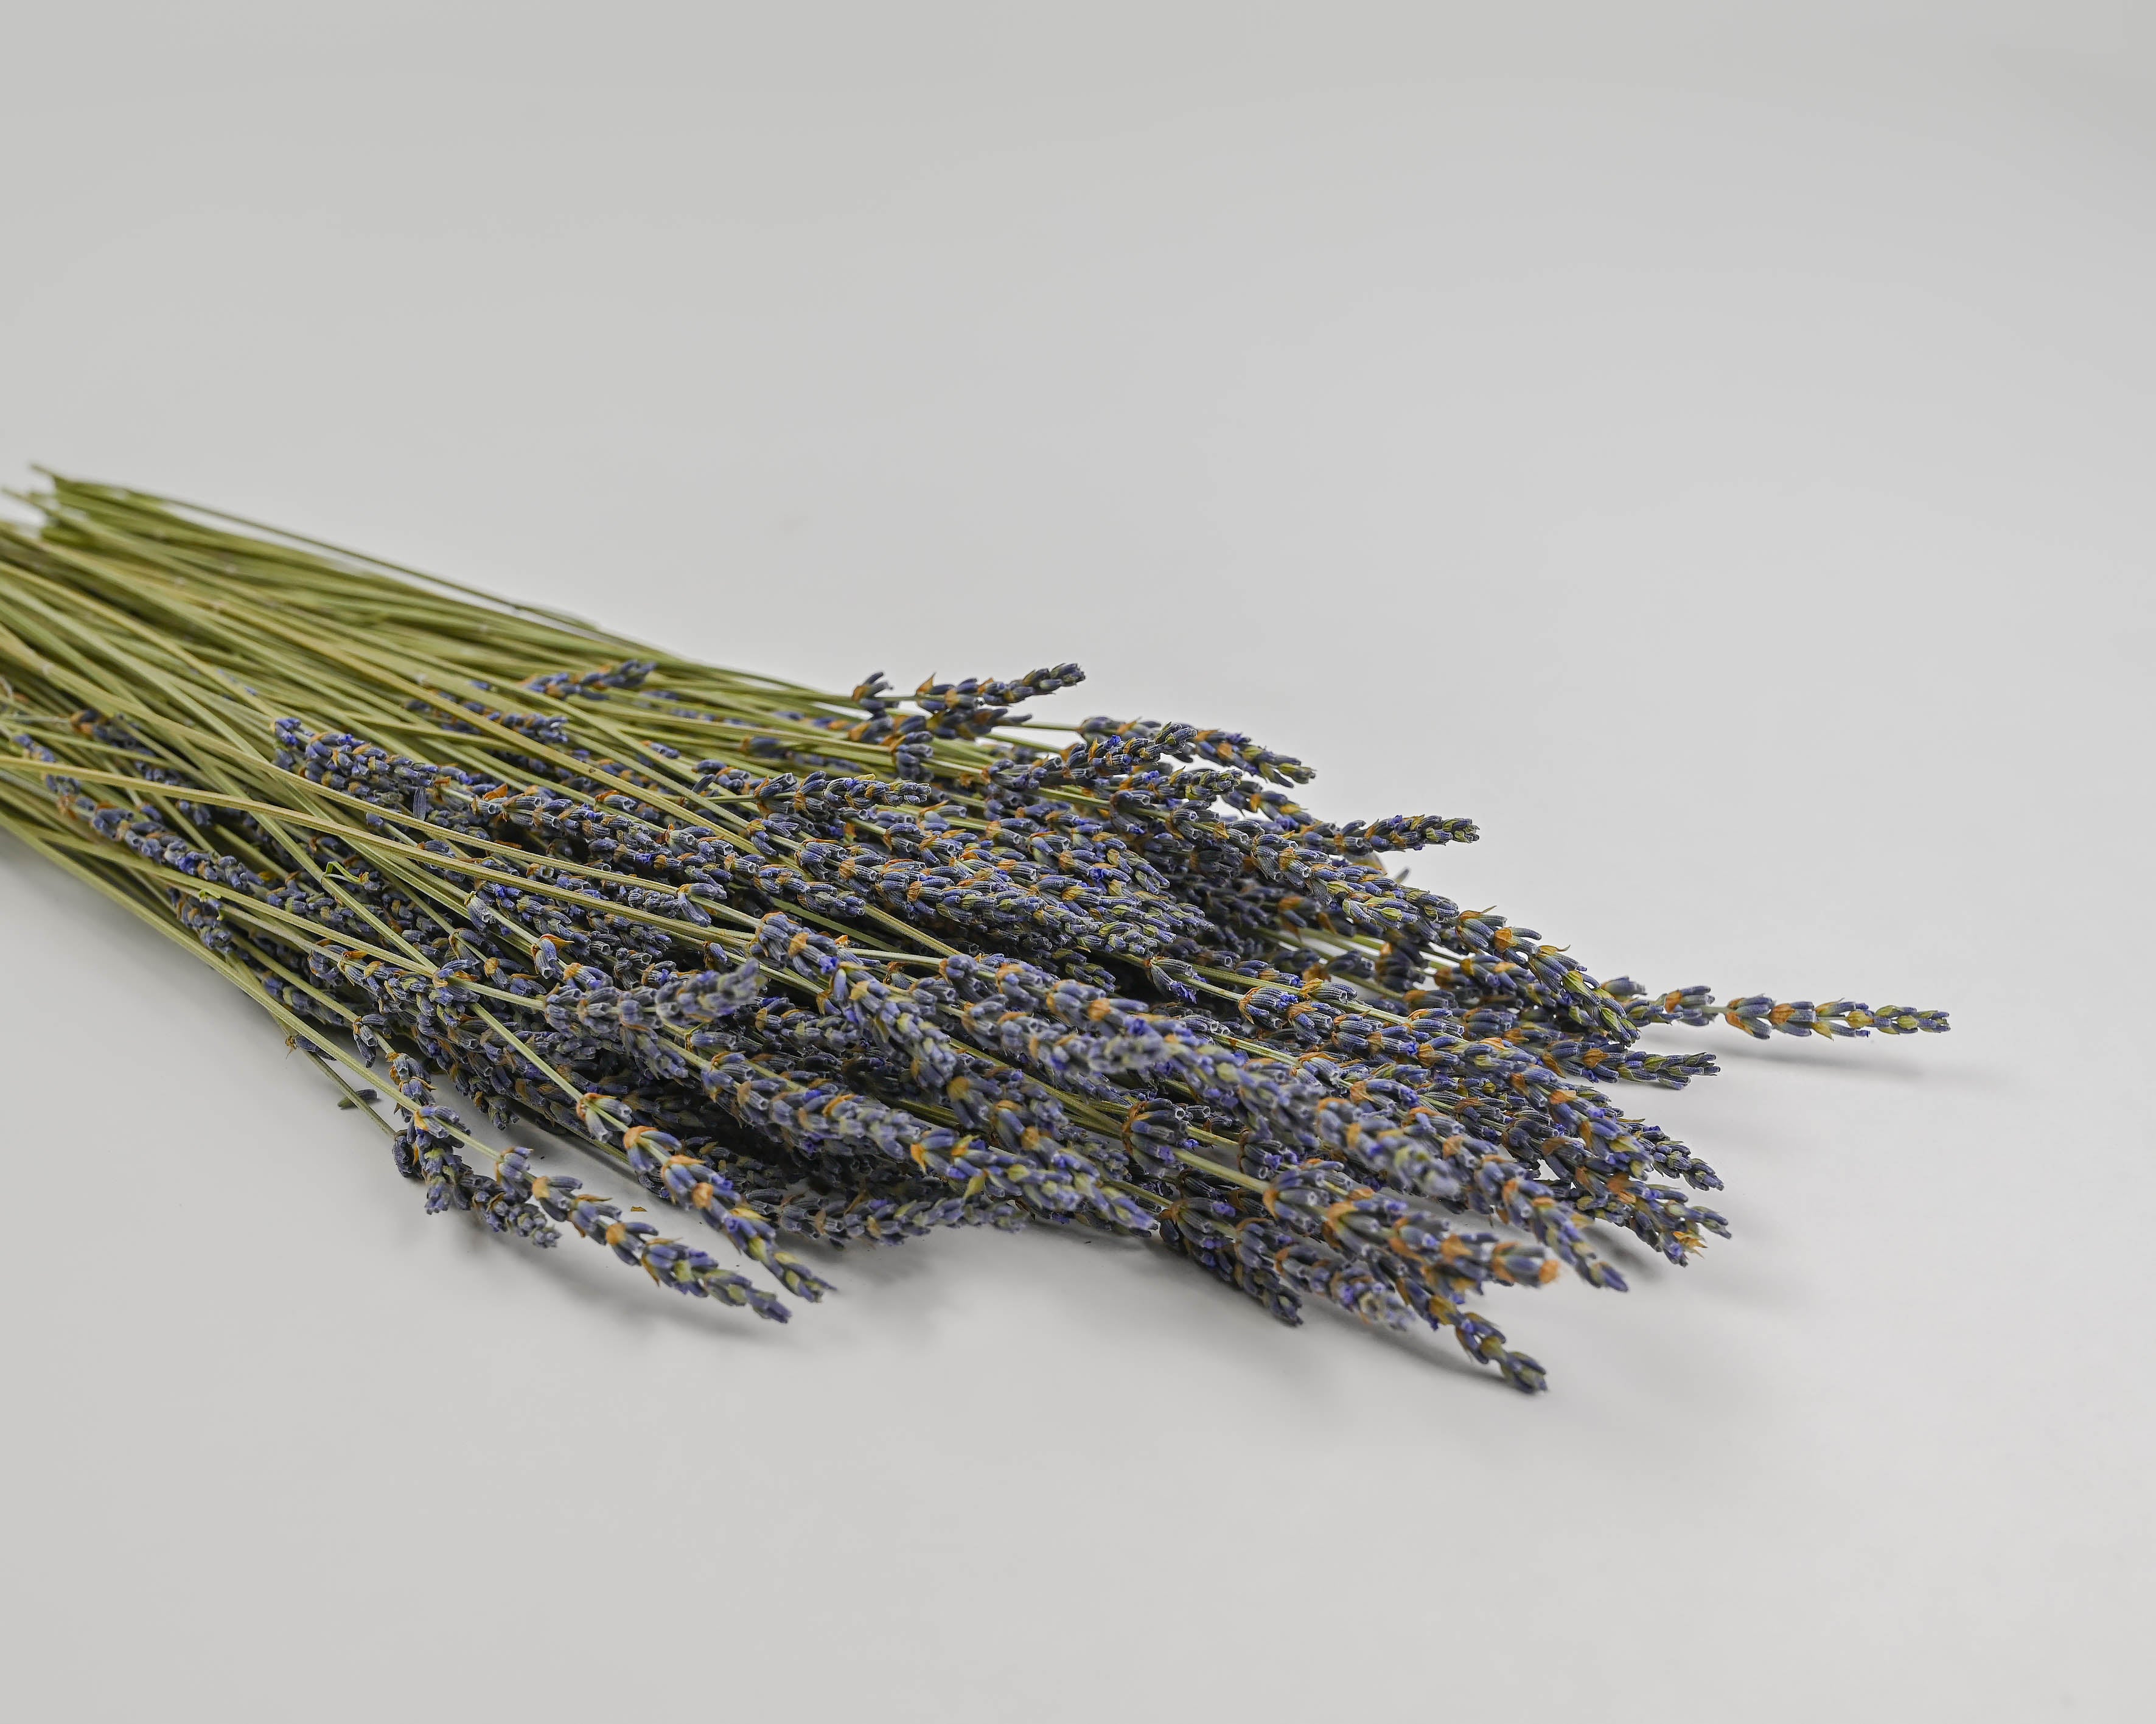 Dried Lavender Bunch - Grosso (French) - Long Stem Single Bunch by Dried Decor